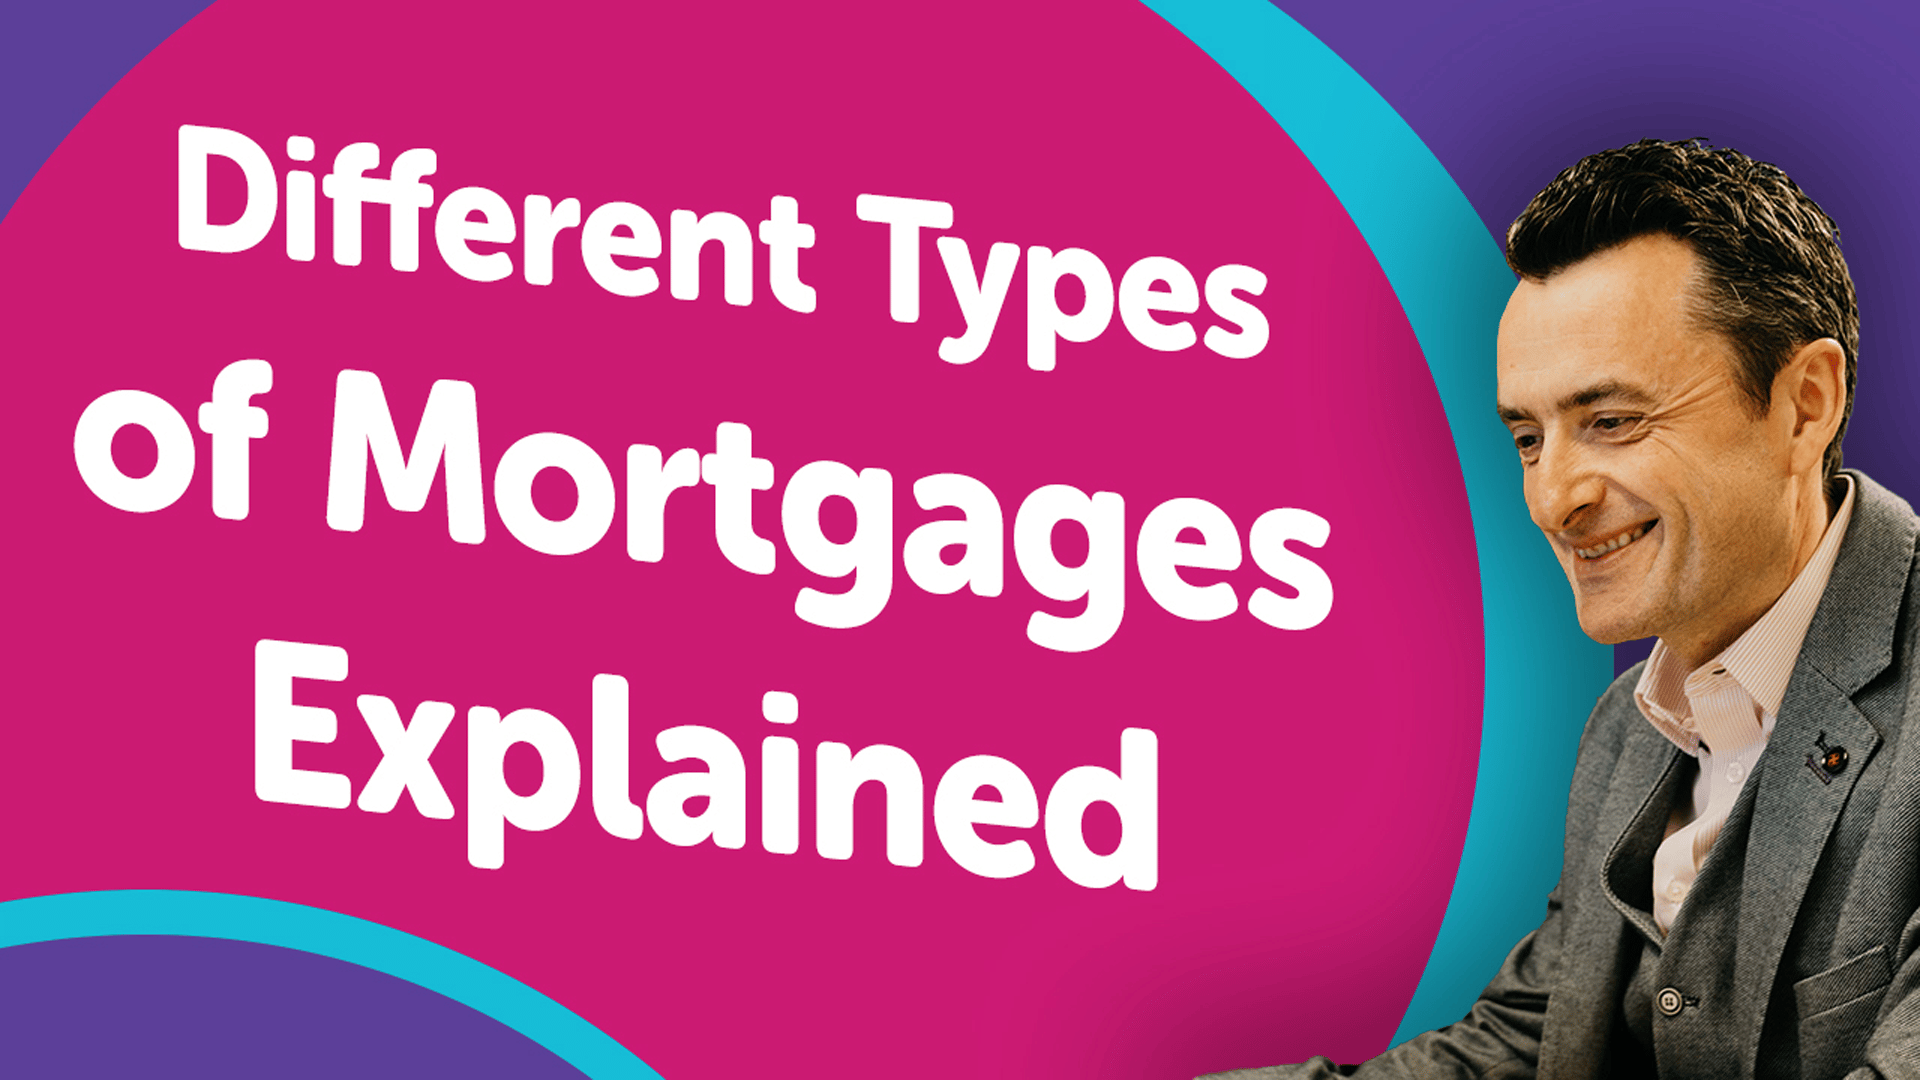 The Different Types of Mortgages Explained in Bristol